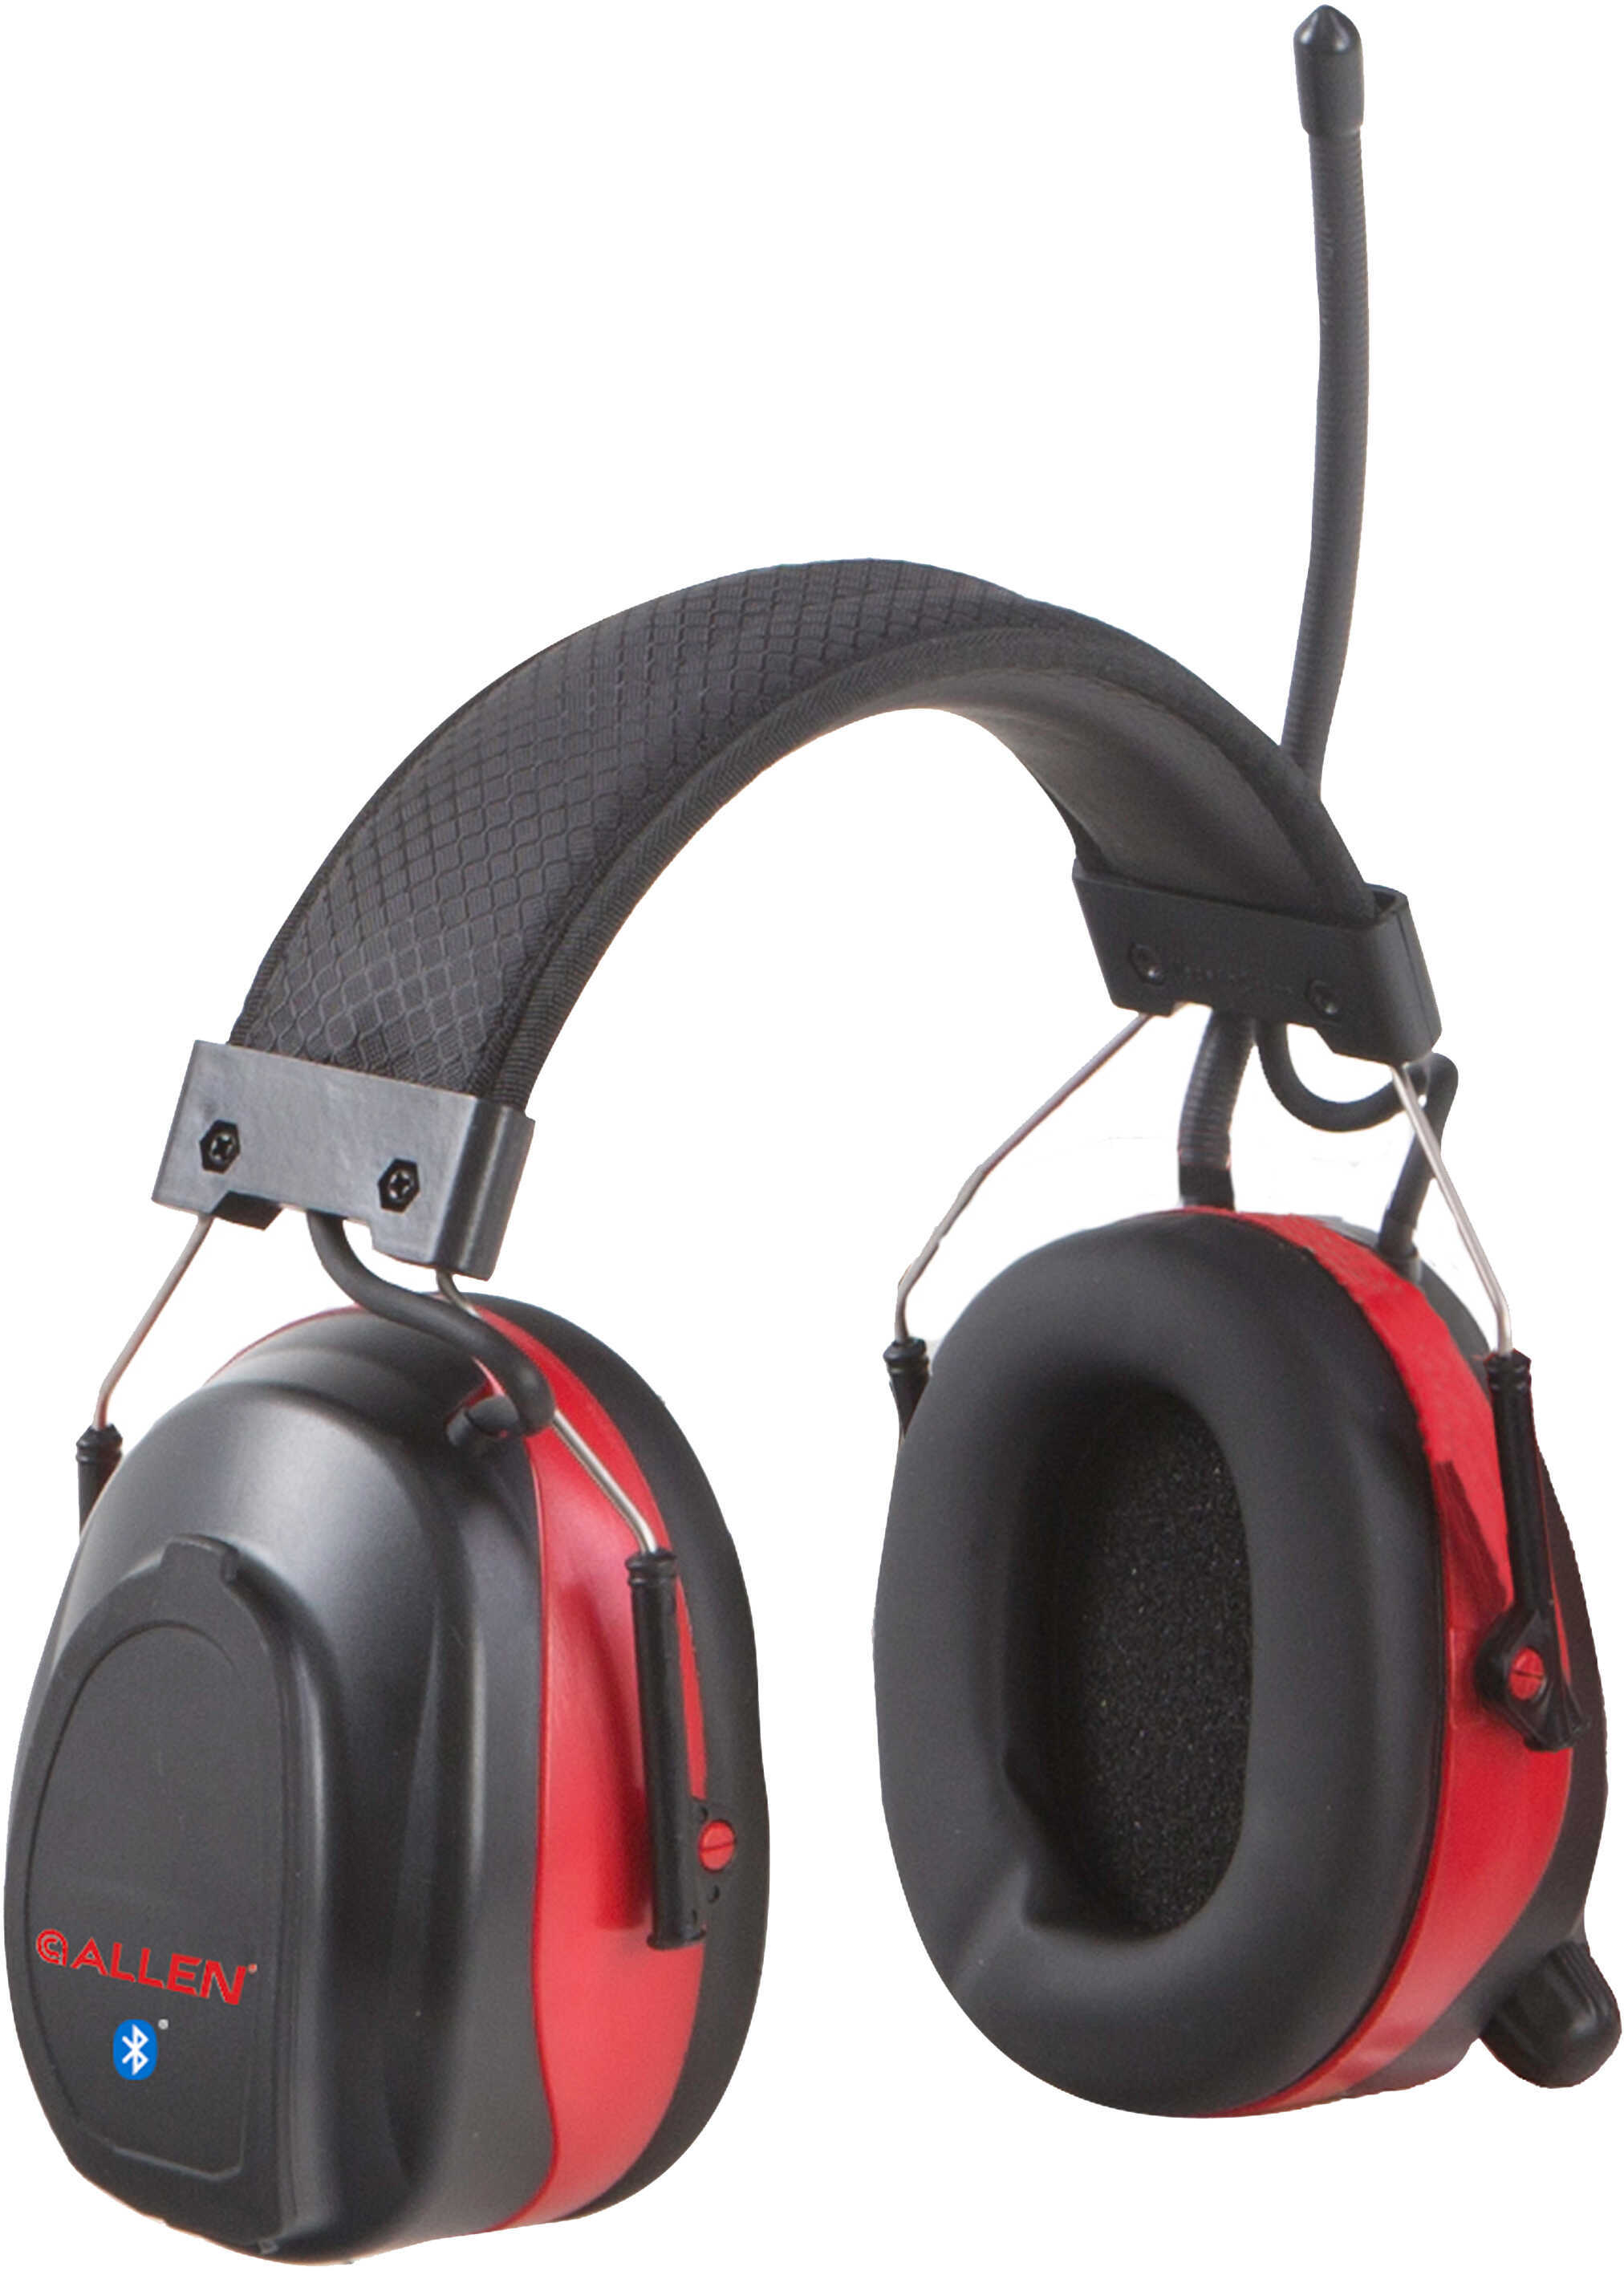 Allen Eshotwave Bluetooth Muff Electronic Hearing Protection Black/Red